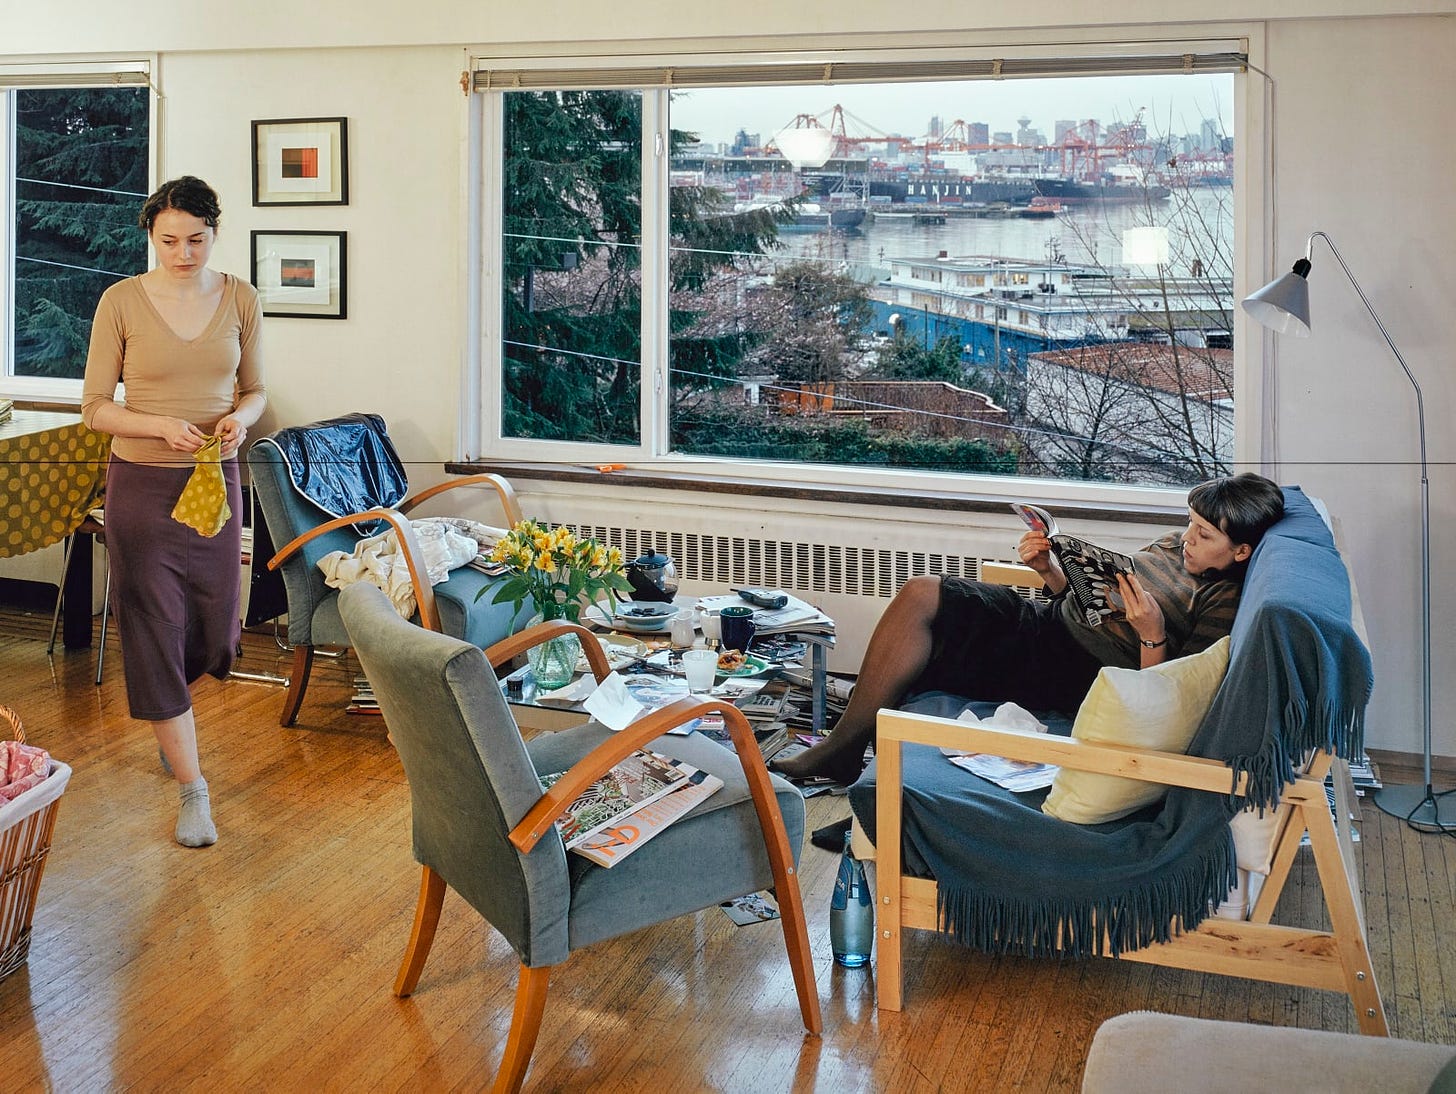 Jeff Wall, A view from an apartment, 2004-05 | White Cube